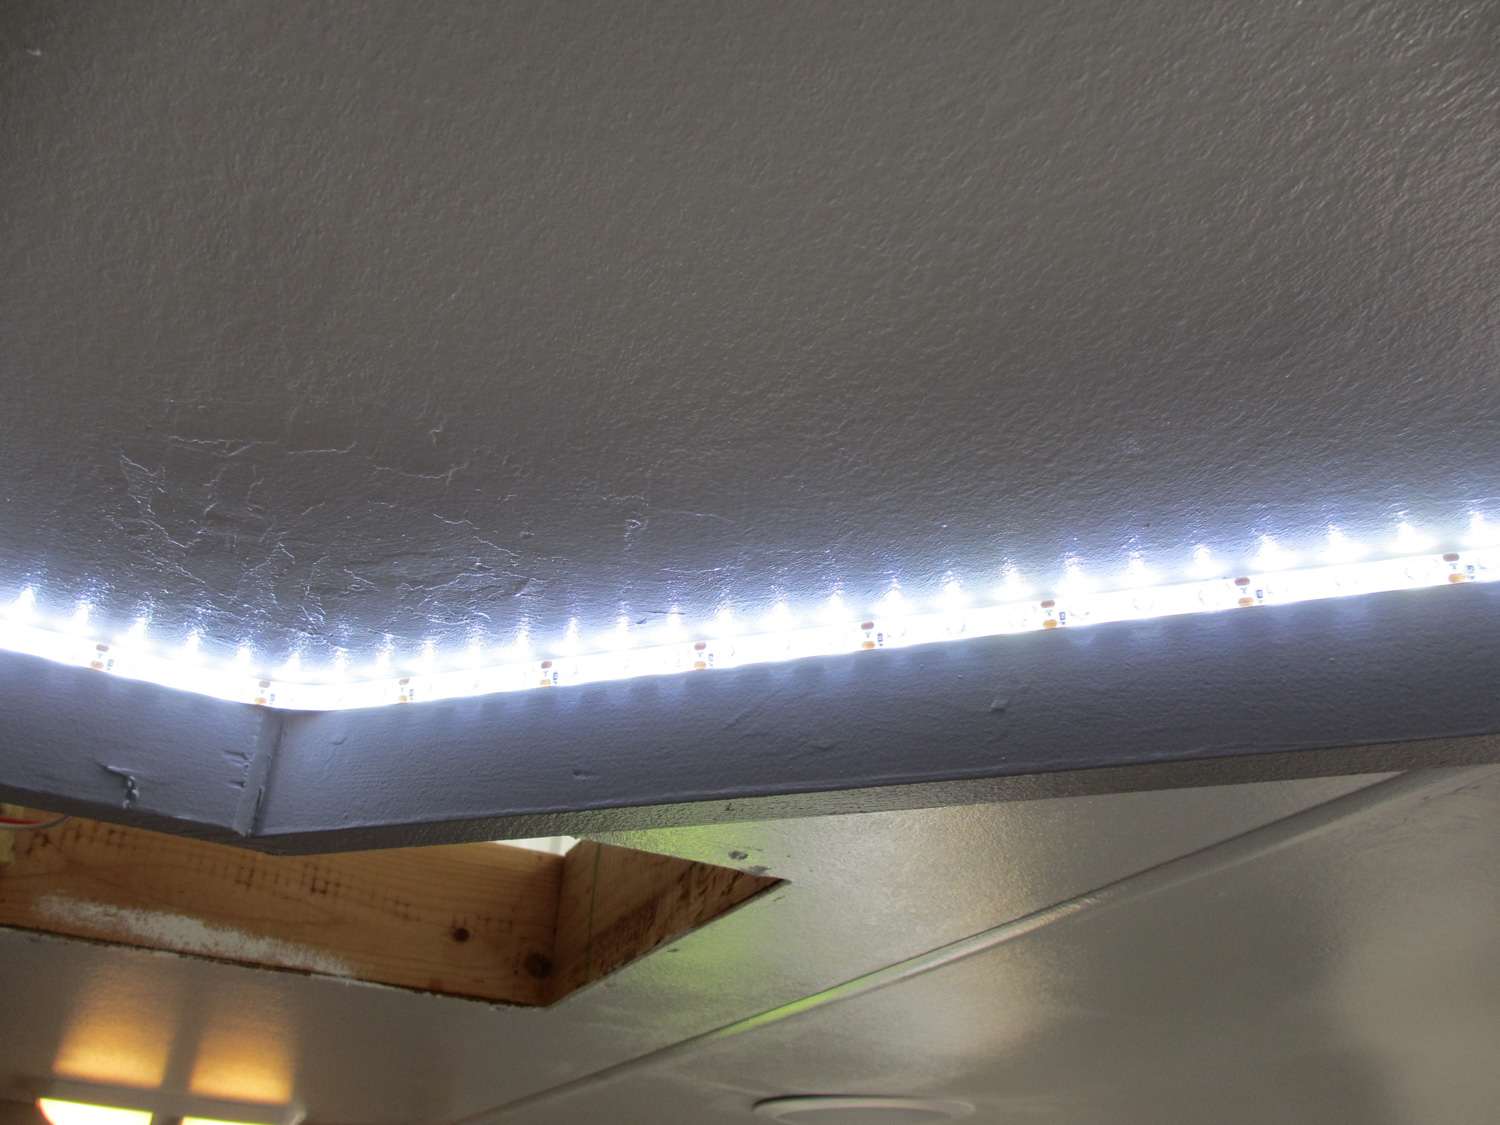  We also installed LED strip lights behind the valance so we wouldn't have to shower in the dark. 